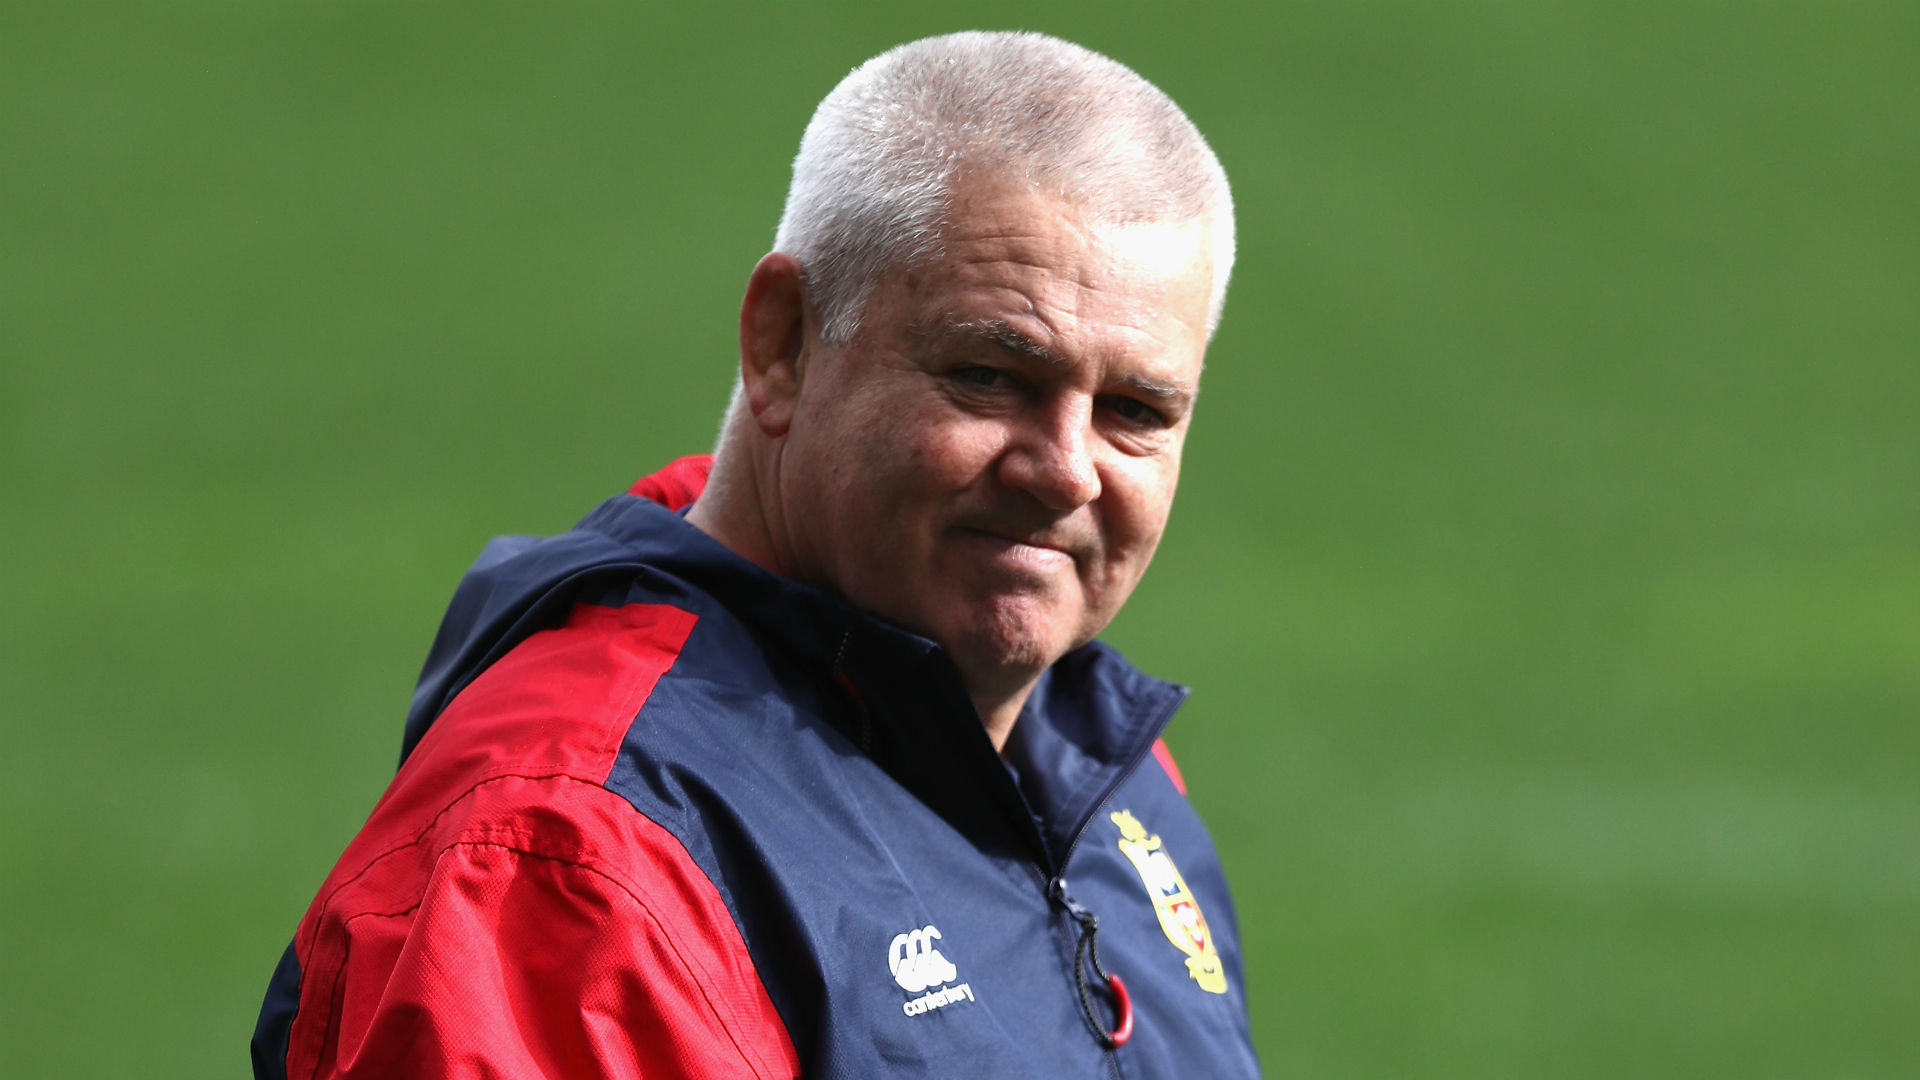 Departing Wales head coach Warren Gatland will take charge of the British and Irish Lions for a third time.